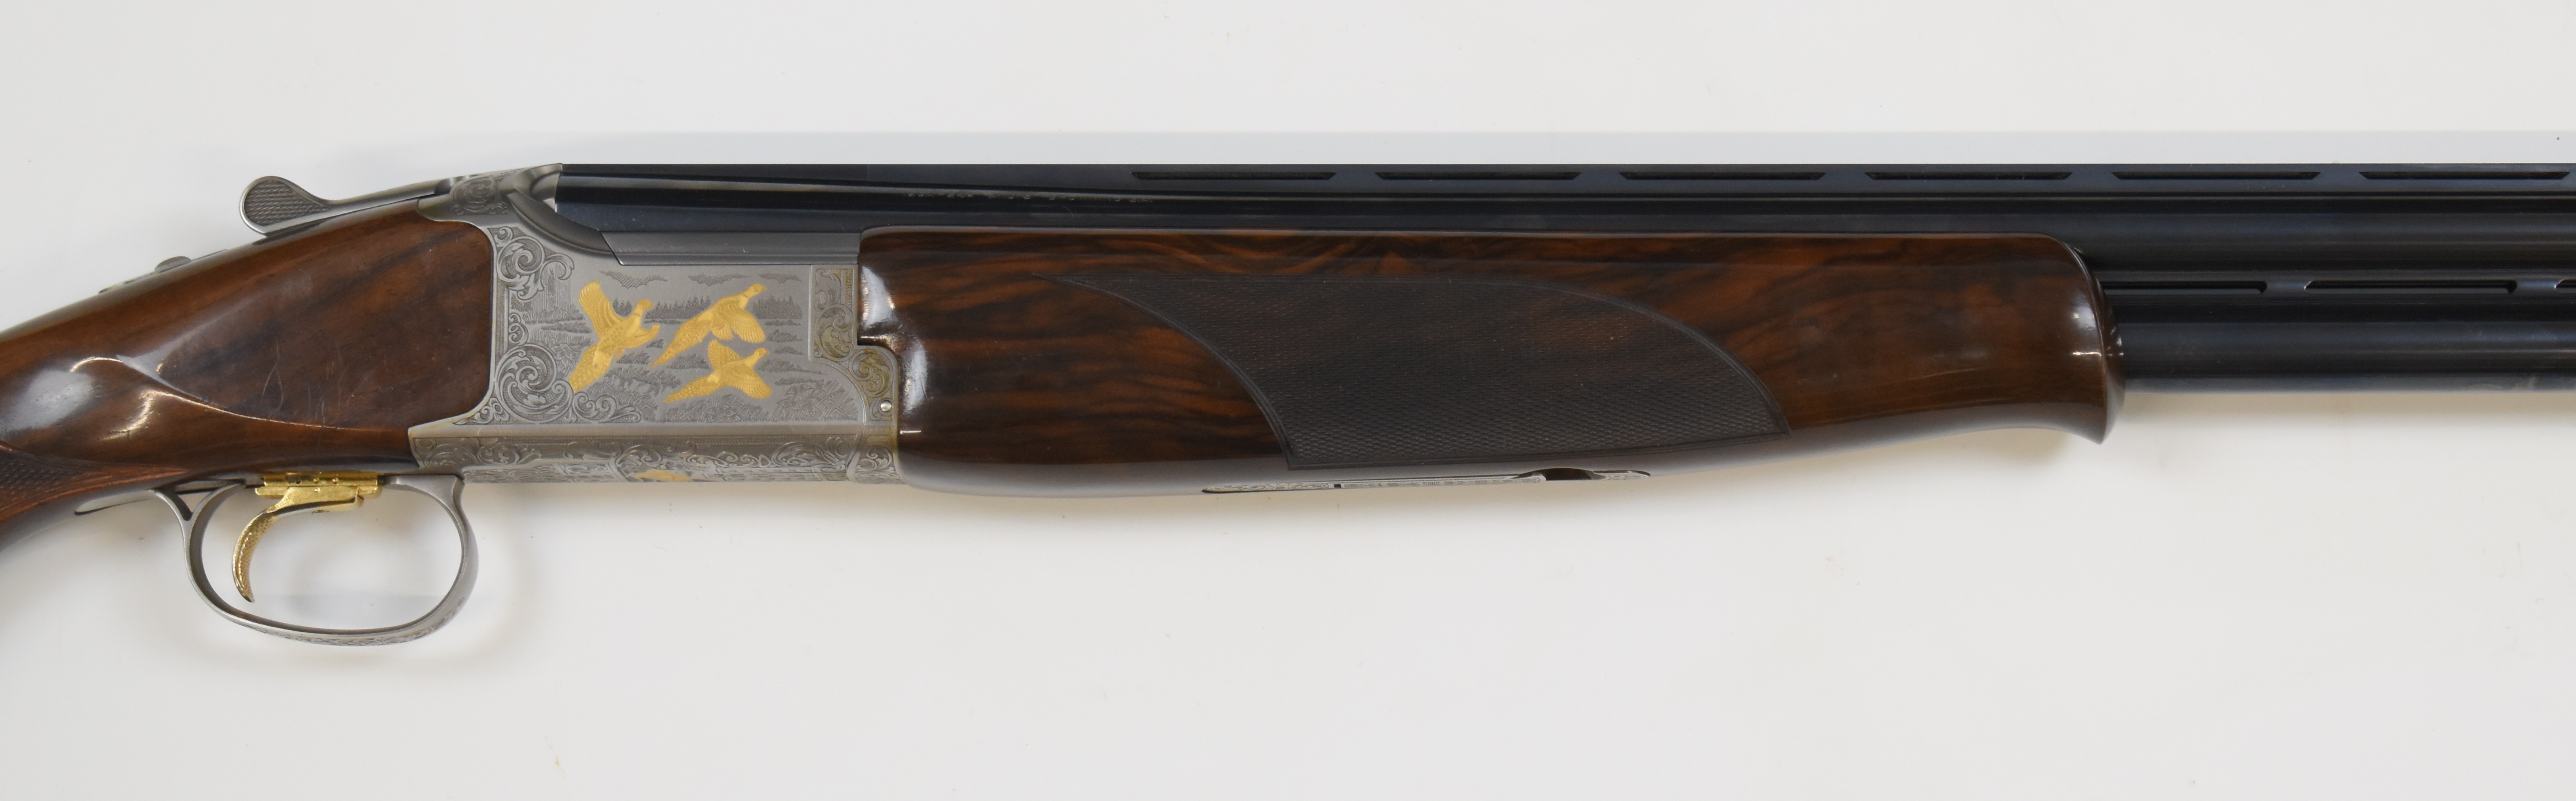 Browning B525 Ultimate 12 bore over and under ejector shotgun with gold engraving of birds - Image 4 of 12